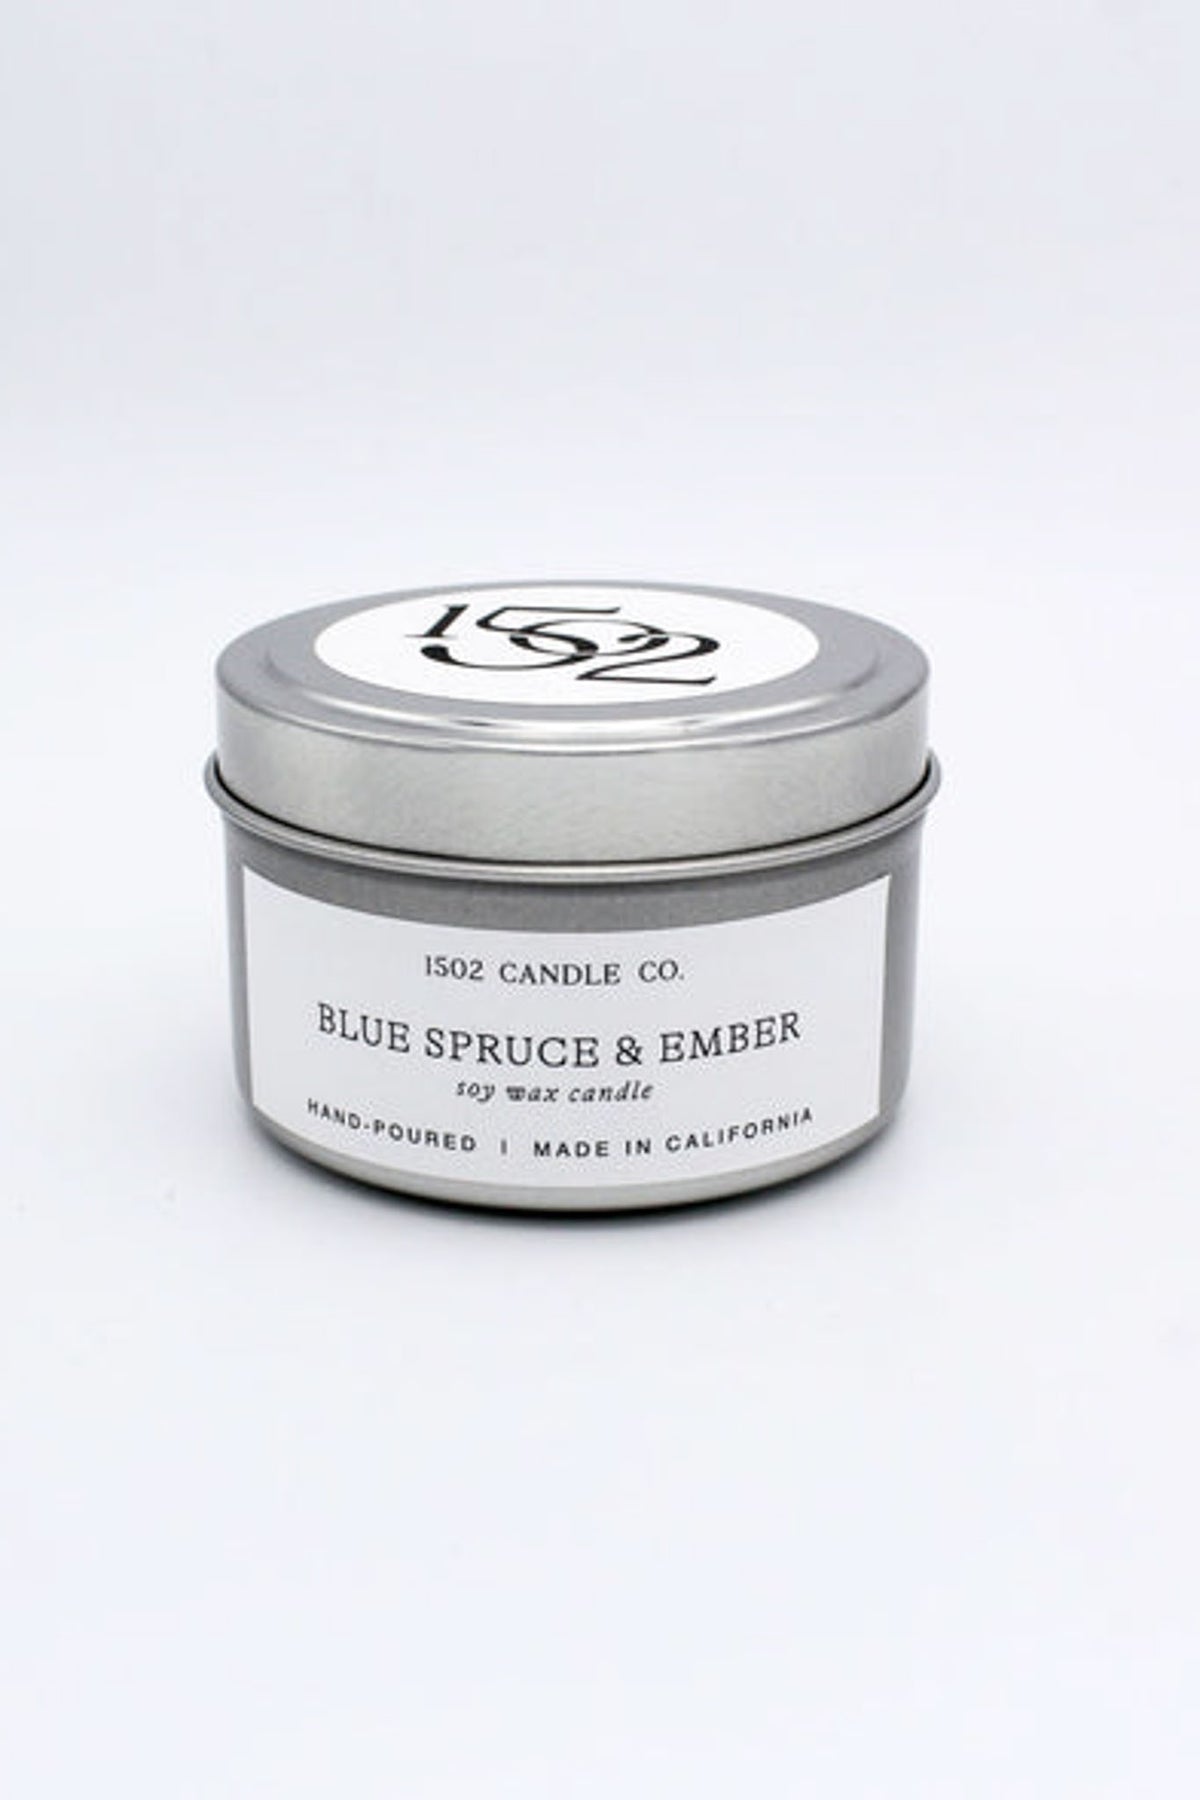 1502 Candle Co. Blue Spruce &amp; Ember Travel Tin Candle